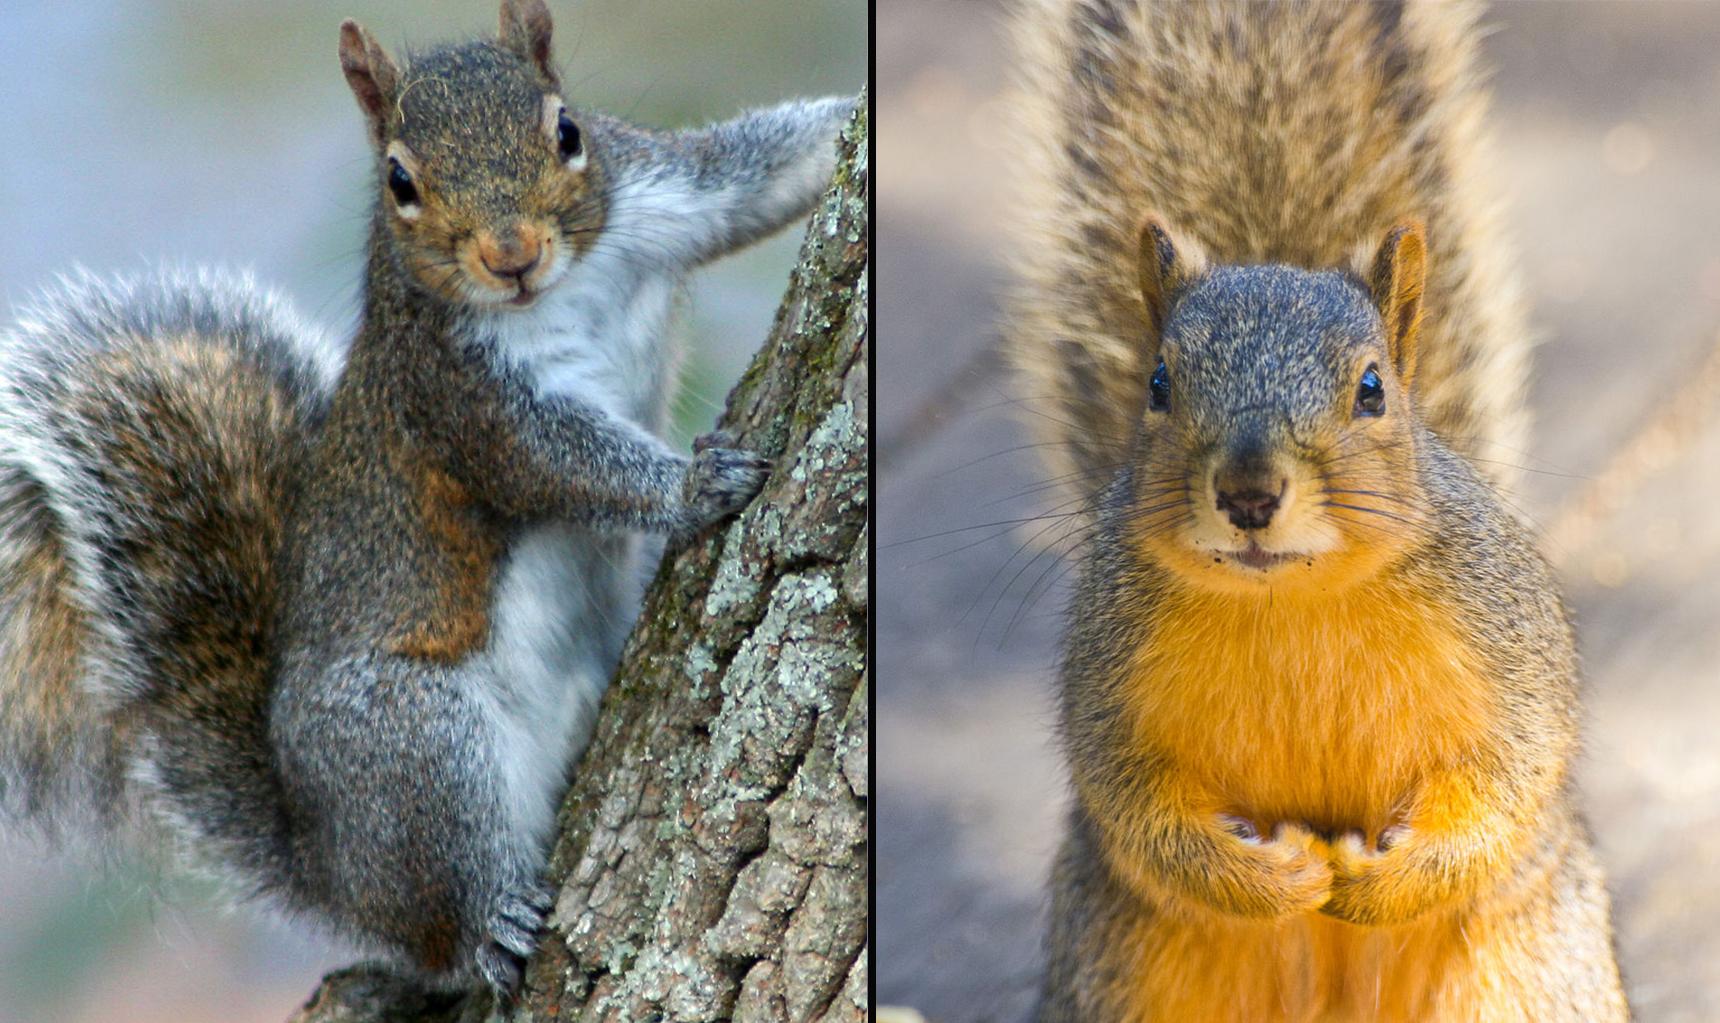 Left: A gray squirrel (Chiswick Chap / Wikimedia Commons) Right: A fox squirrel (Antoine Taveneaux / Wikimedia Commons)